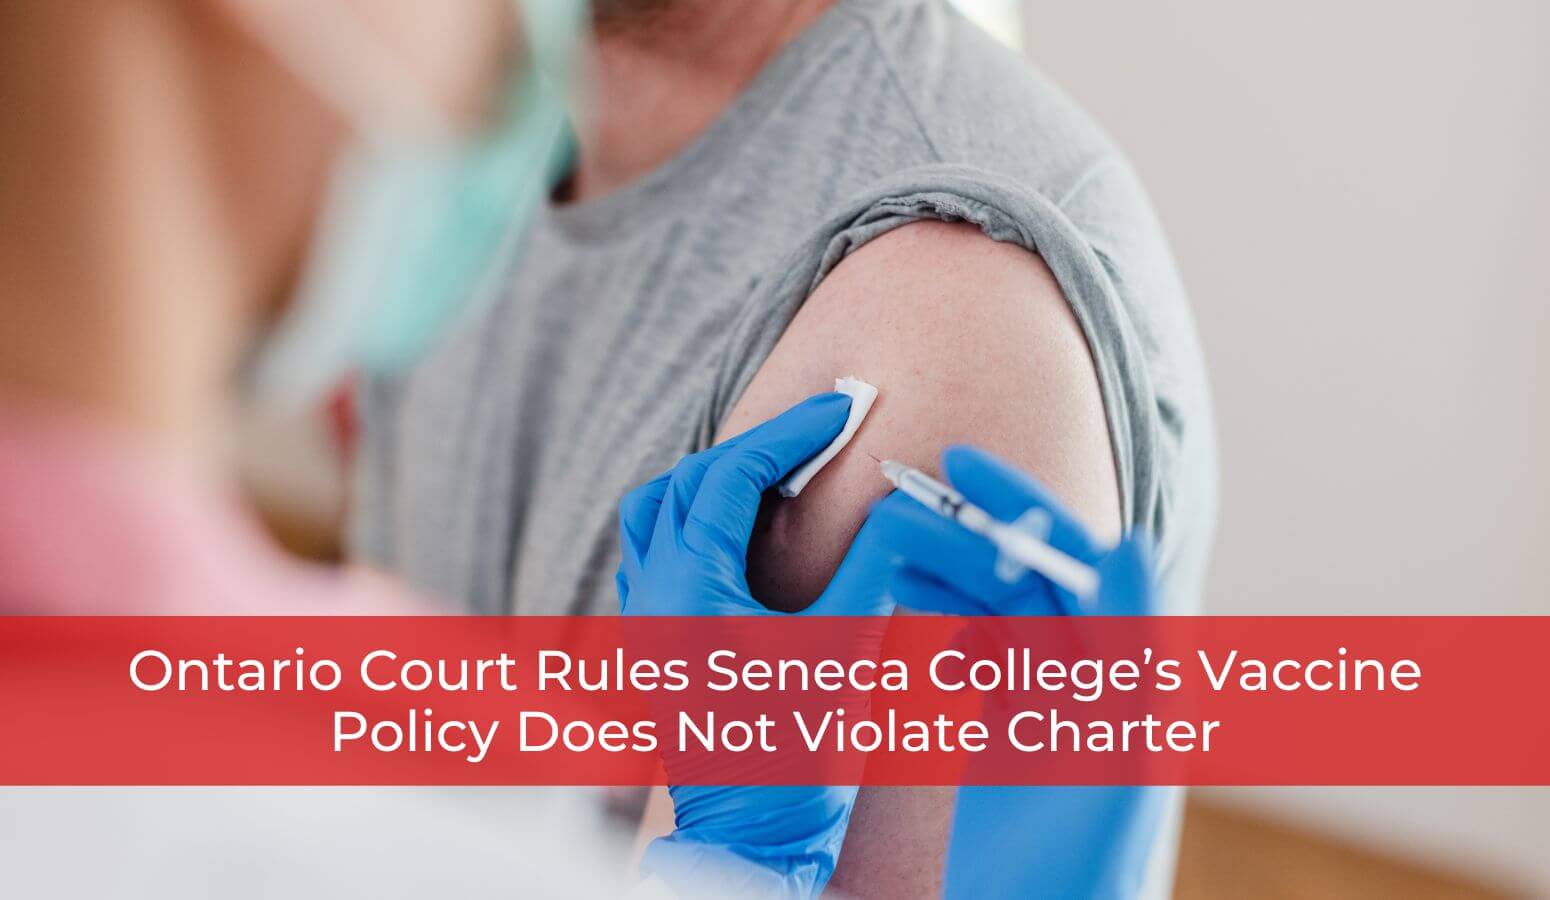 Featured image for “Ontario Court Rules Seneca College’s Vaccine Policy Does Not Violate Charter”